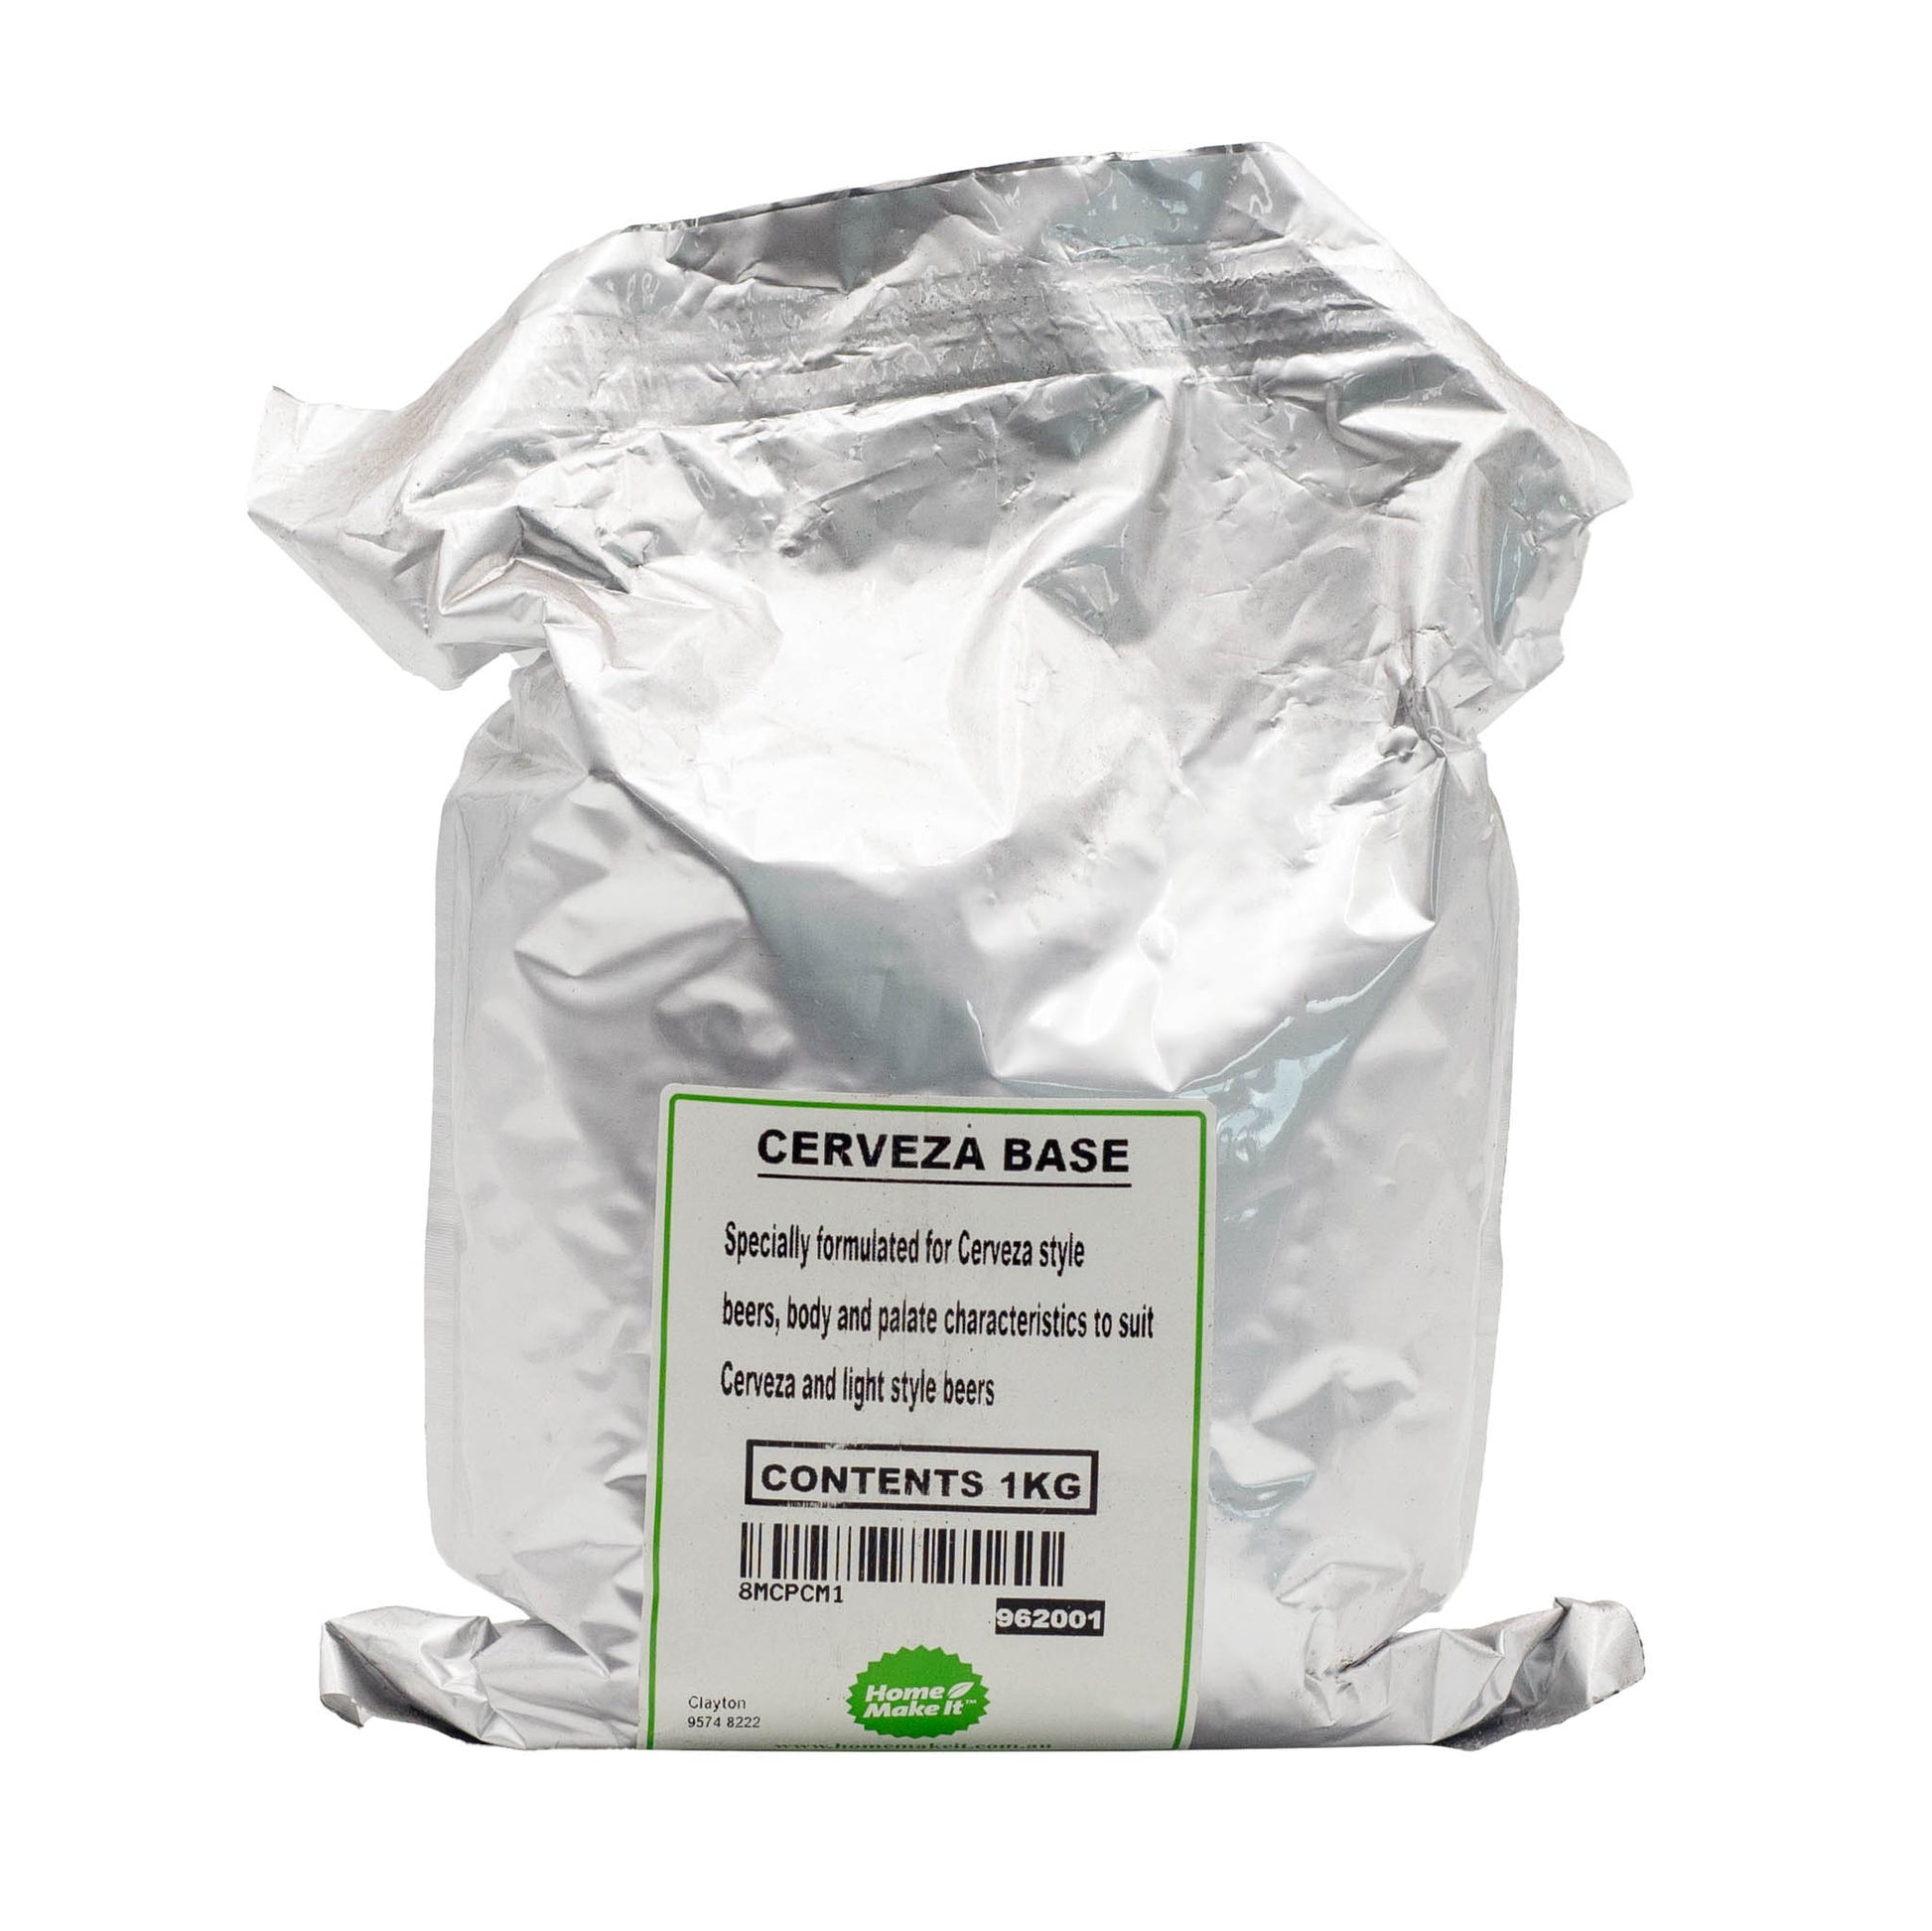 1kg bag of Cerveza base mix specially made for light style beers.